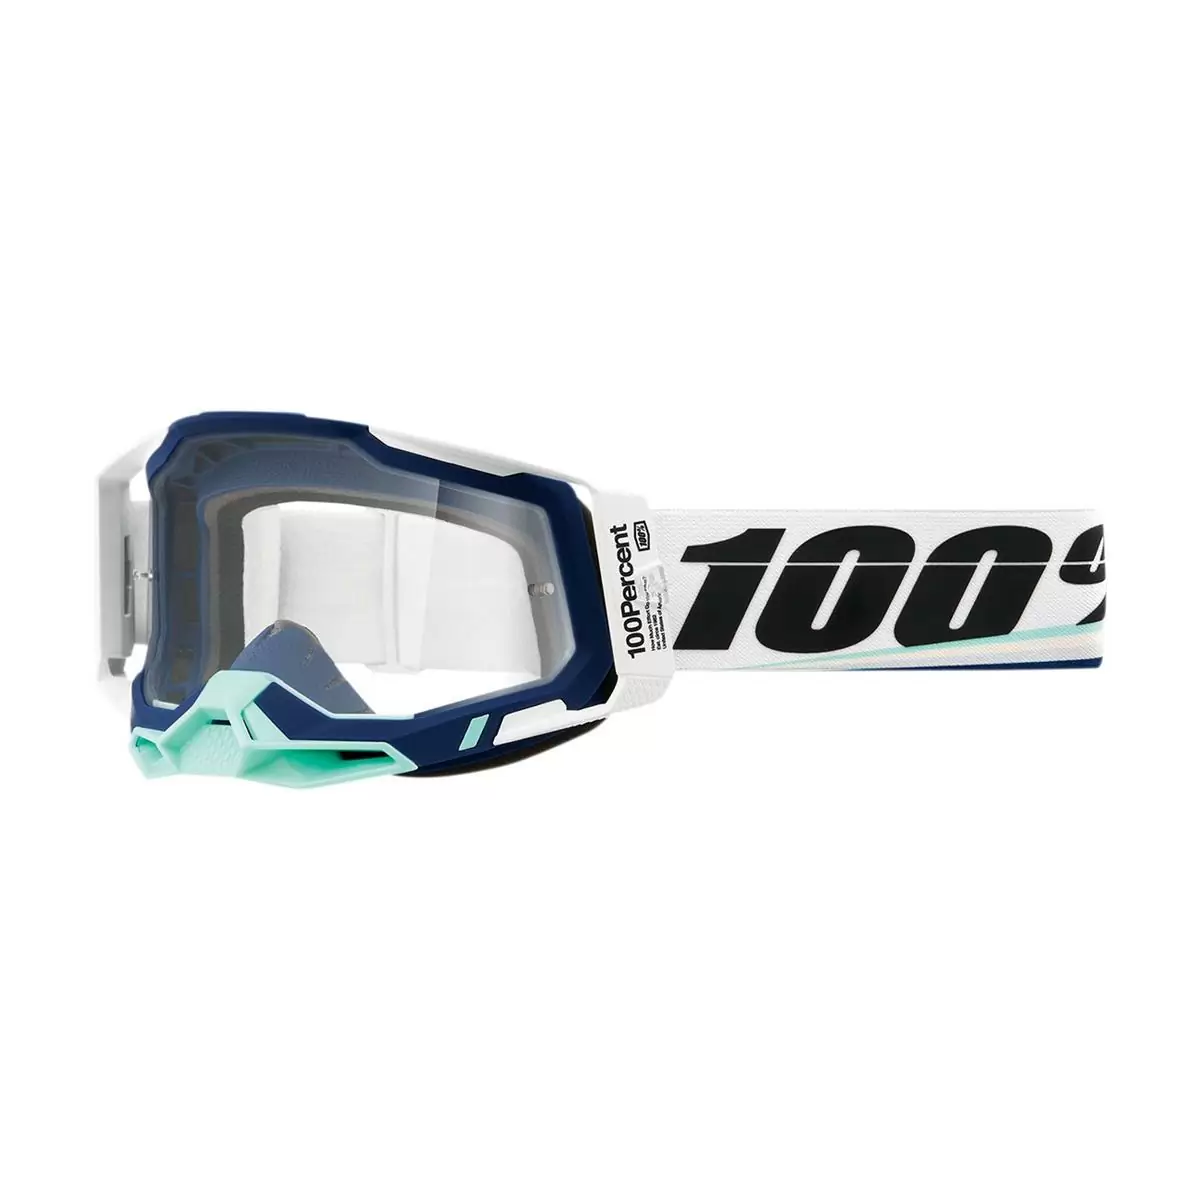 Racecraft 2 Arsham Goggles Clear Lens - image